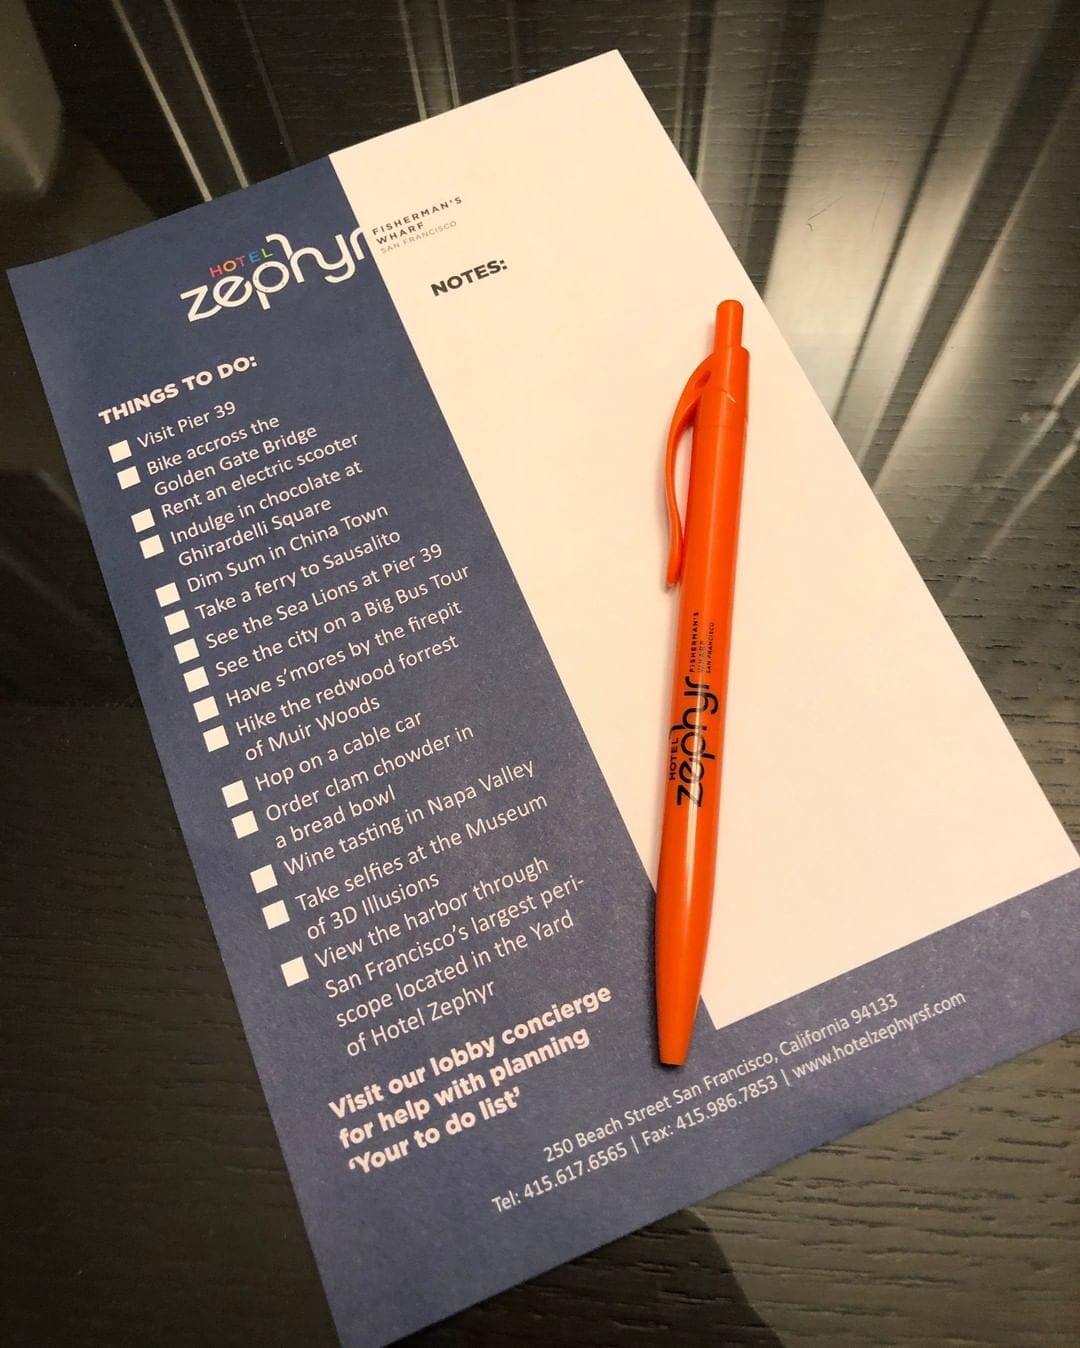 There’s no reason to stay in this weekend. #hotelzephyrsf #weekendideas #visitfishermanswharf #sanfrancisco #checklist #thingstodo #exploresf